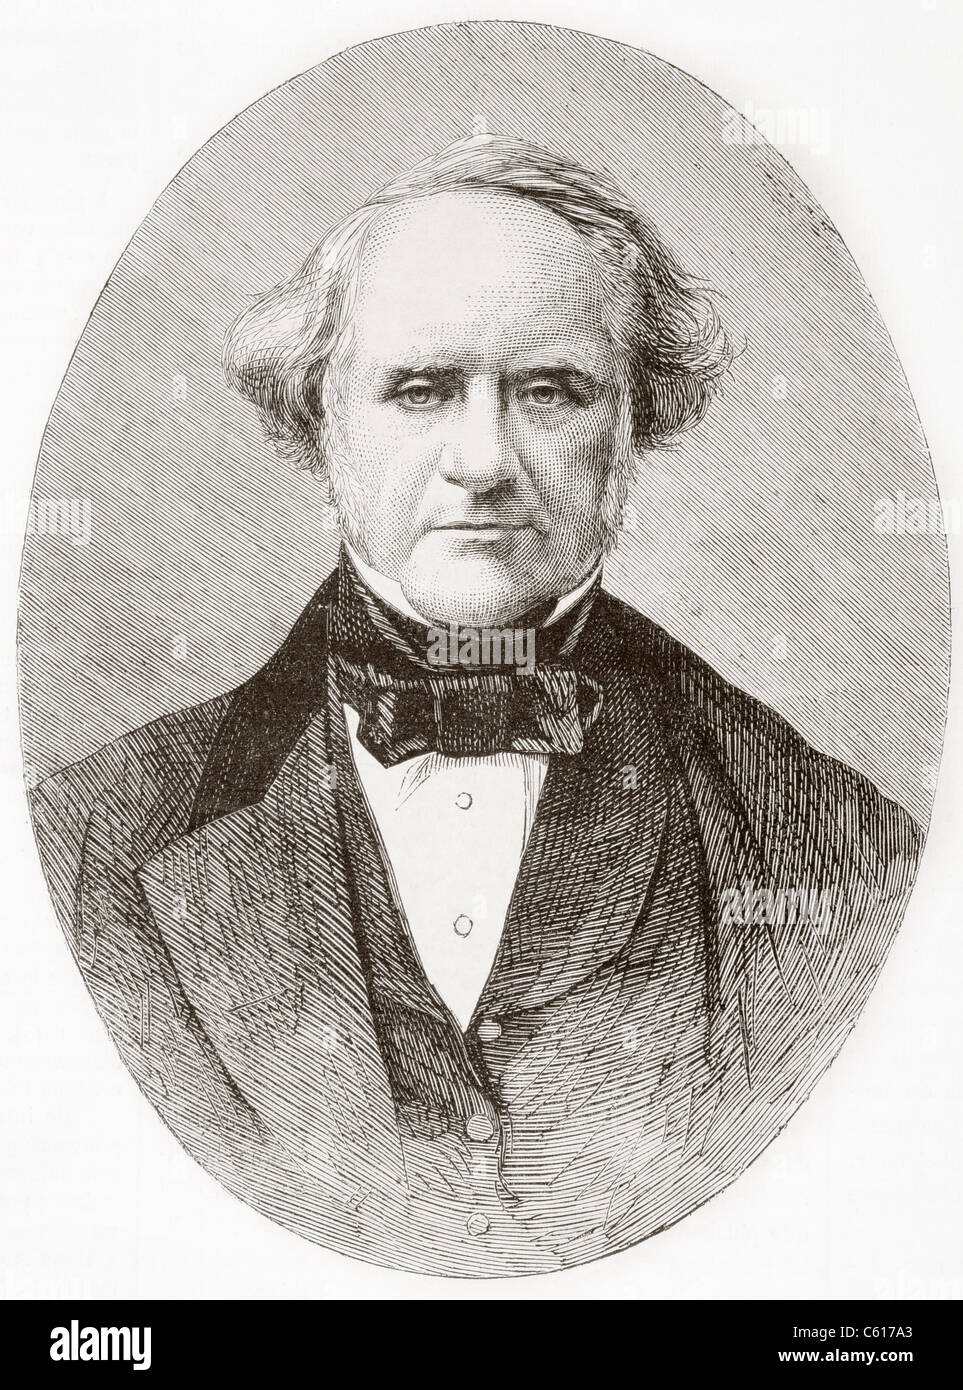 George Peabody, 1795 – 1869. American businessman and philanthropist who founded Peabody Institute. Stock Photo